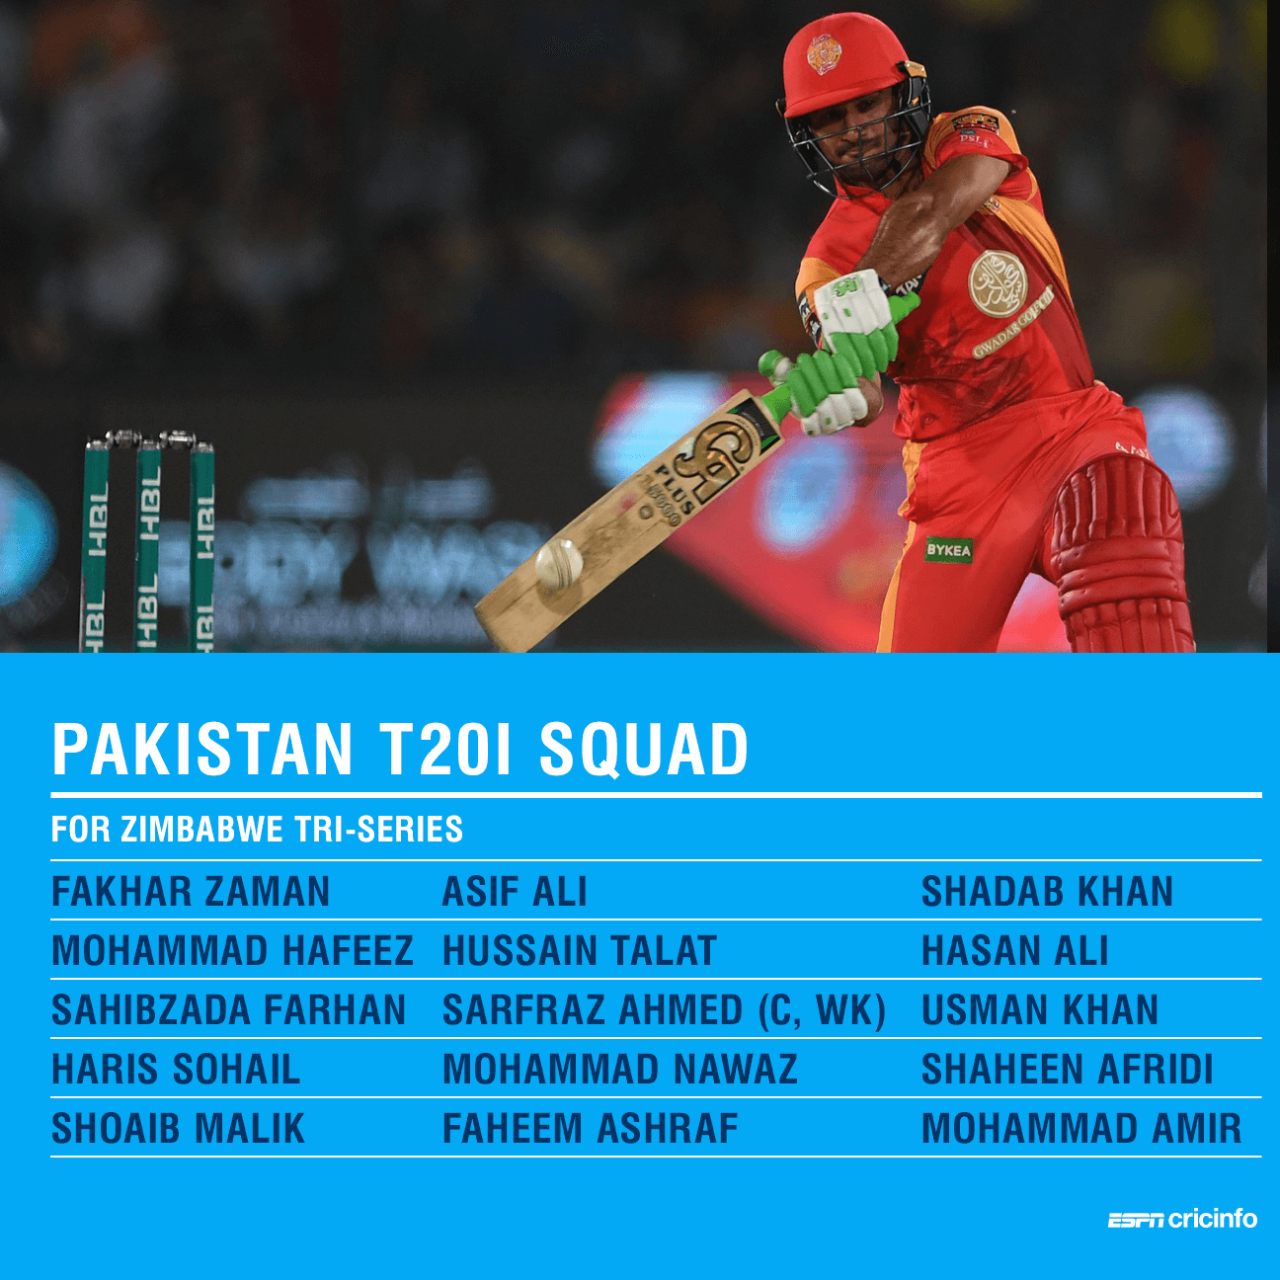 Pakistan squad for the T20 tri-series